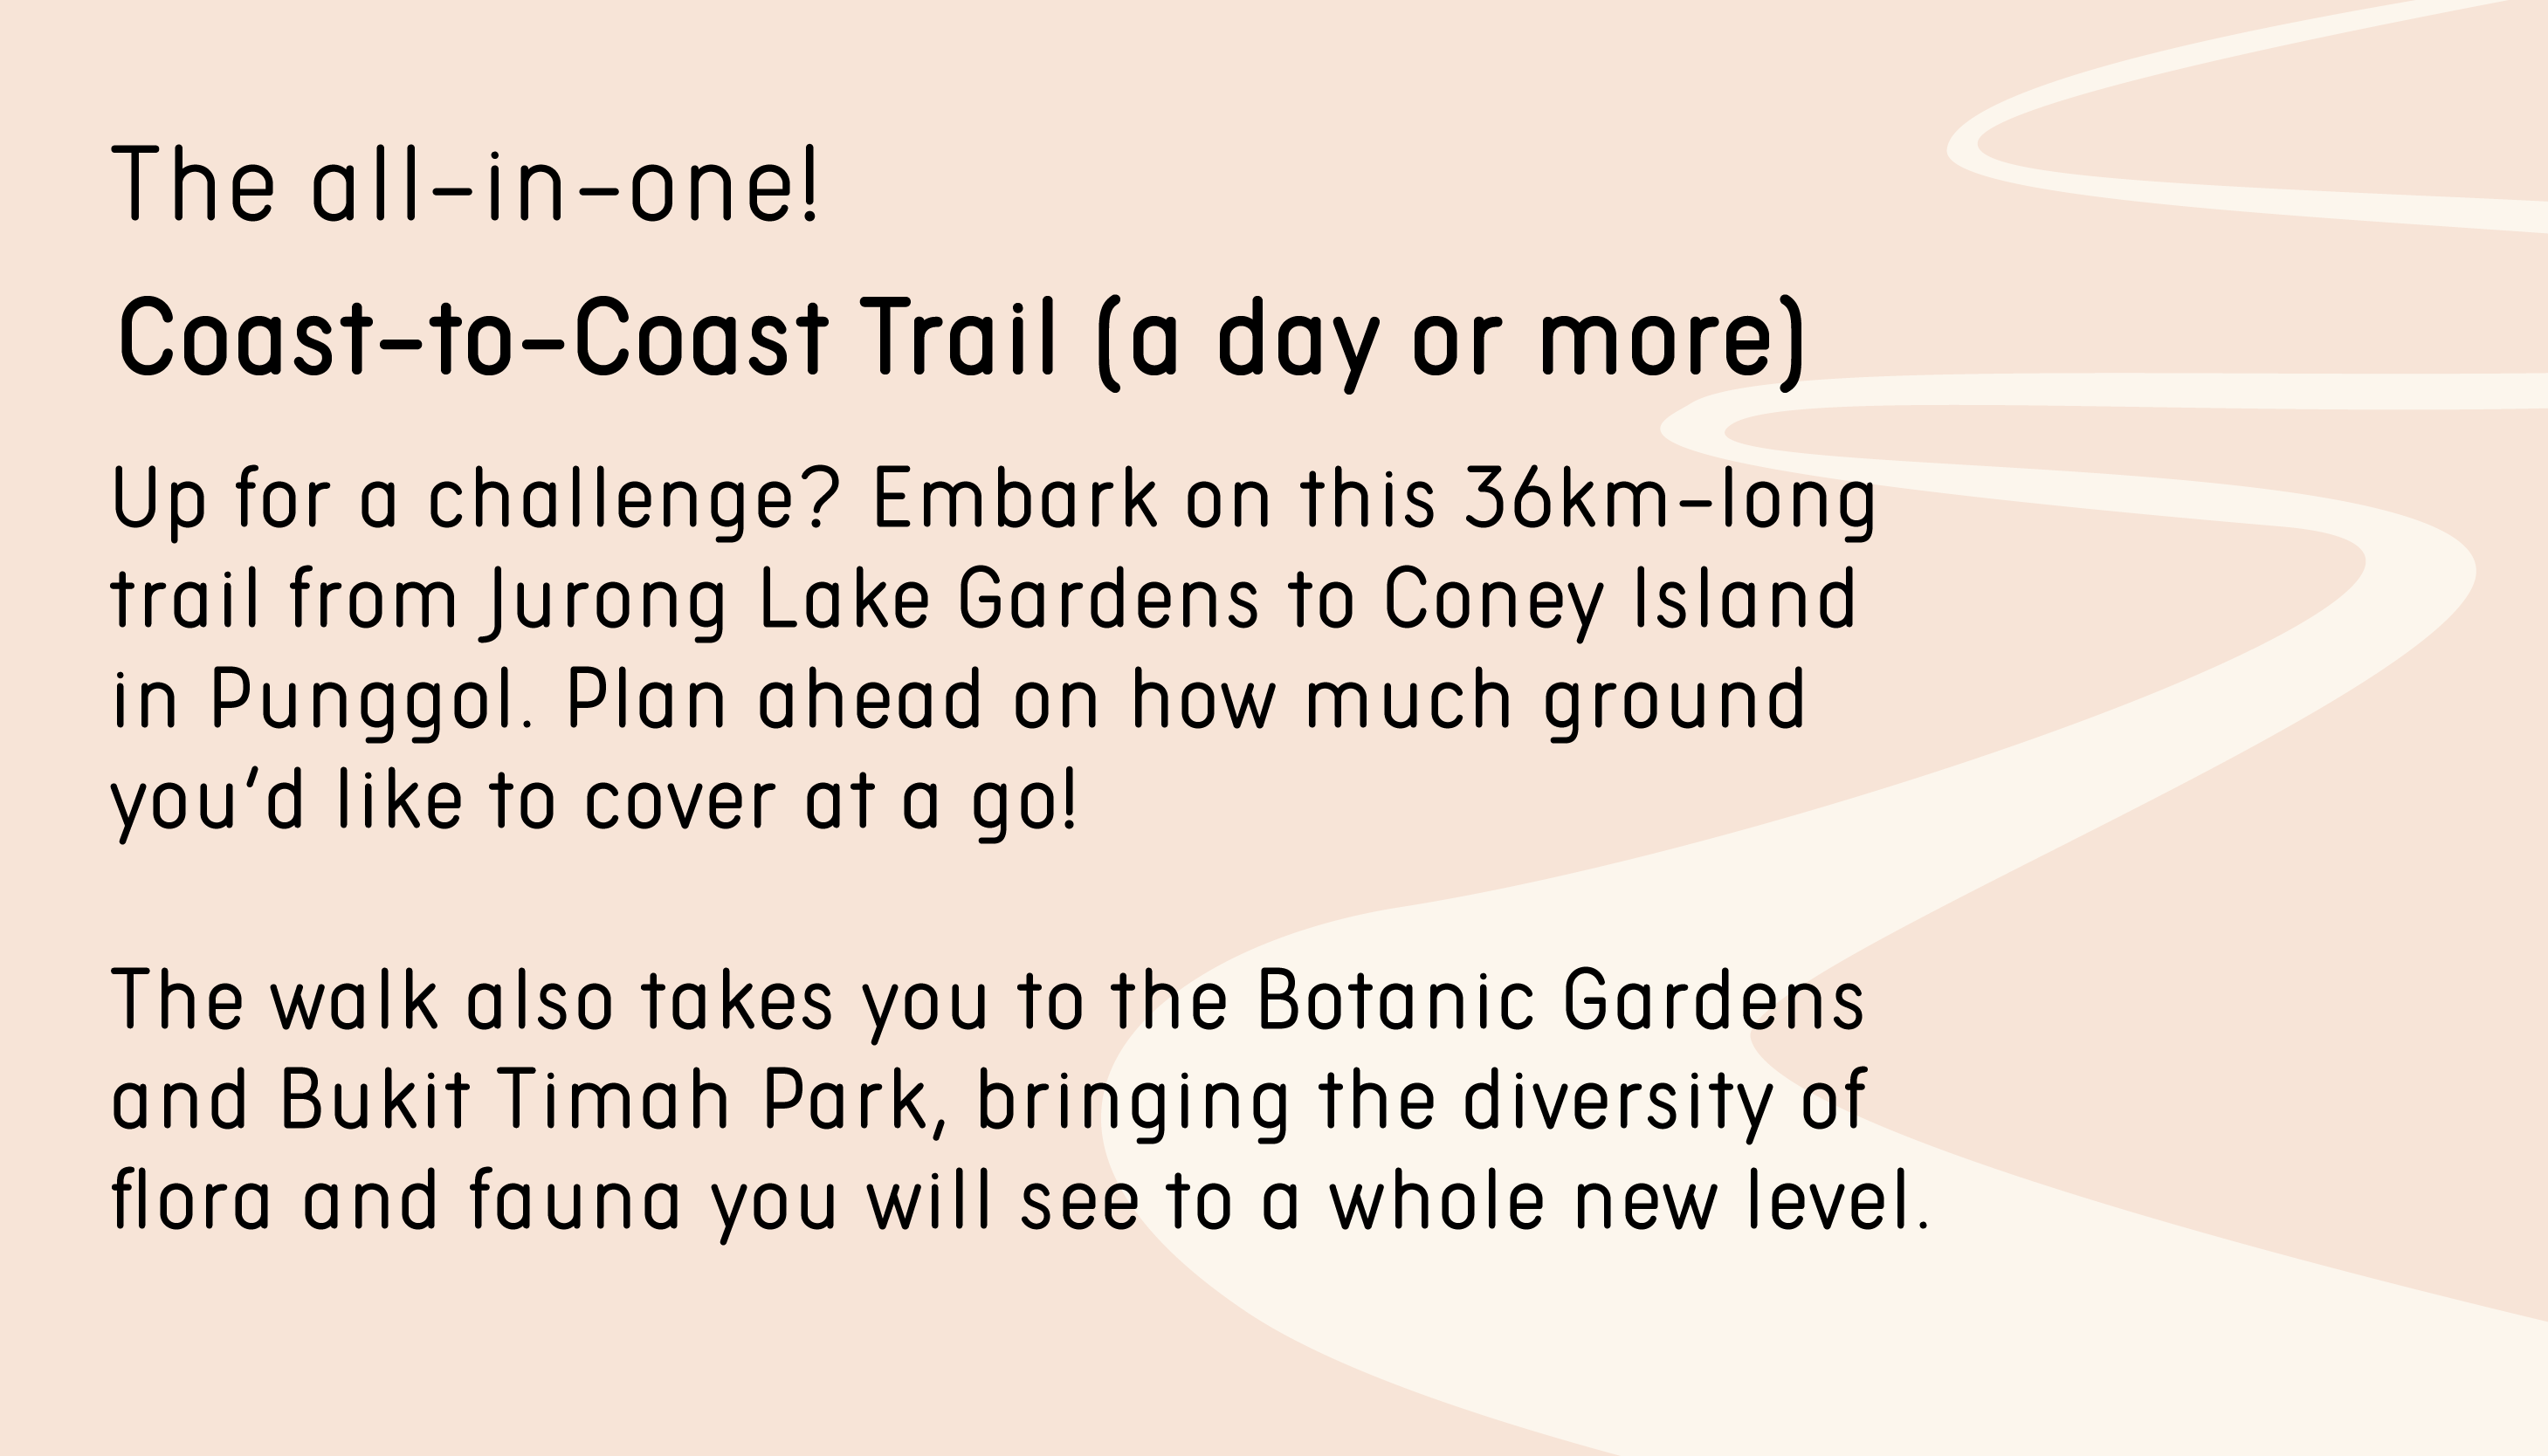 The all-in-one. Coast-to-Coast Trail (a day or more). If you’re up for a challenge, embark on this 36km-long trail from Jurong Lake Gardens to Coney Island in Punggol. Plan ahead on how much ground you’d like to cover at a go! The walk also takes you to the Botanic Gardens and Bukit Timah Park, bringing the diversity of flora and fauna you will see to a whole new level.